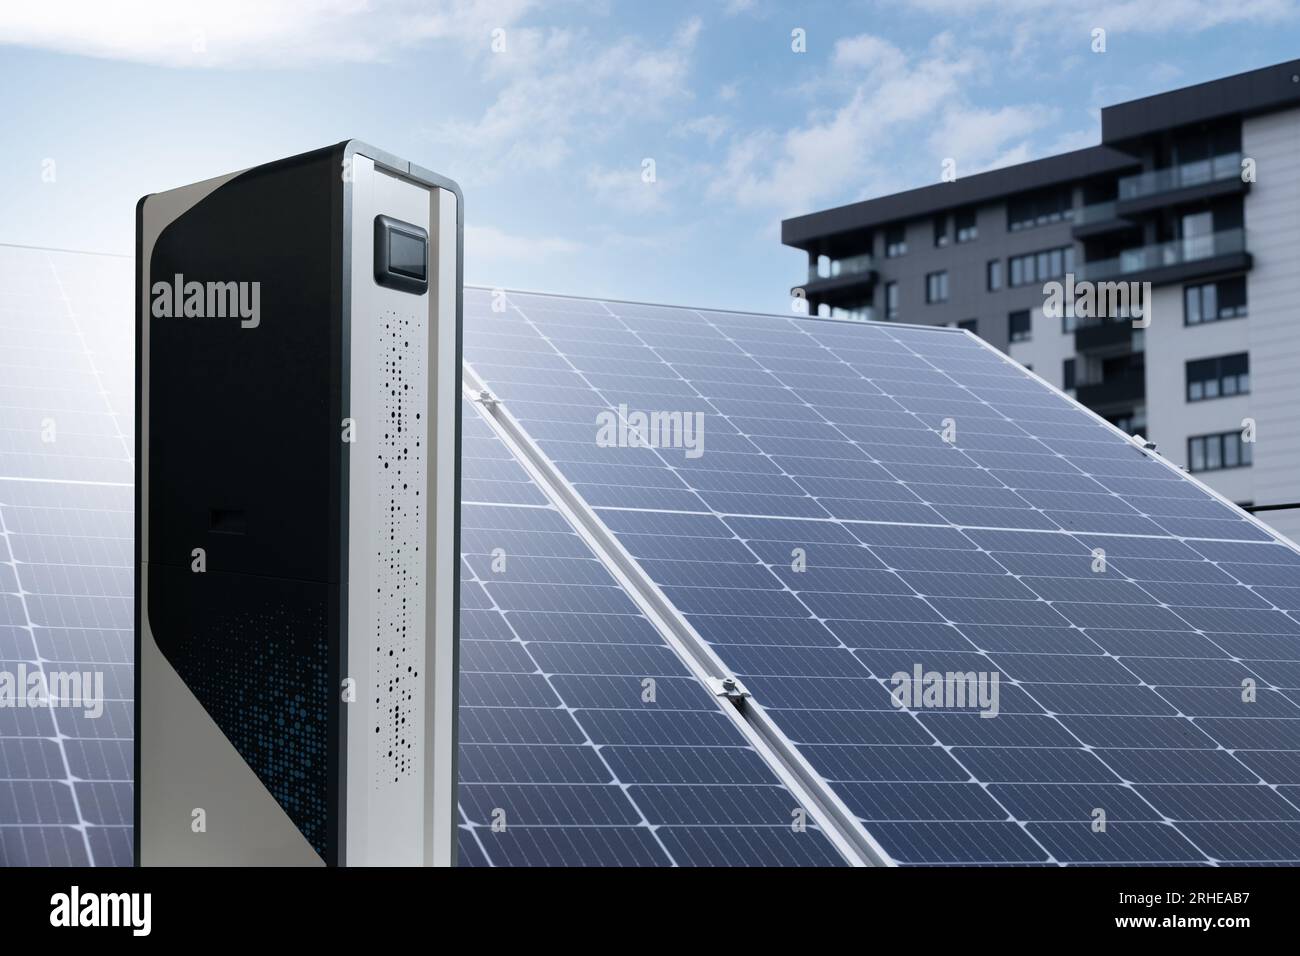 Solar panel with rechargeable energy storage. Stock Photo